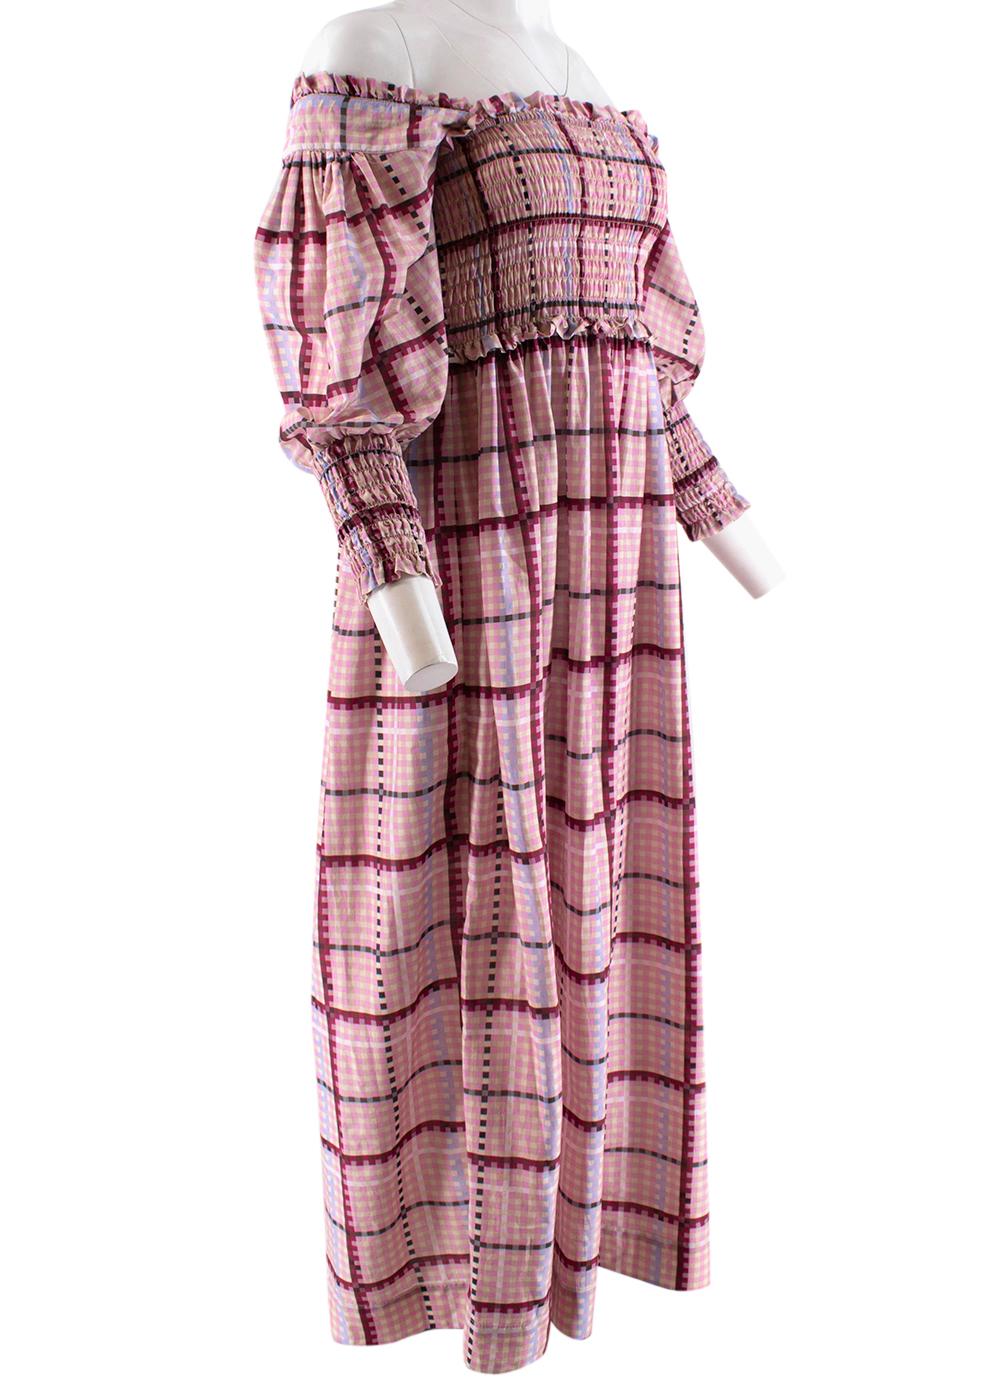 Ganni Pink Checked Shirred Cotton Silk Blend Maxi Dress

- Pink check design 
- Maxi length 
- Square neckline 
- Shirred waist
- Elasticated shoulders, waist and sleeve cuffs 
- Ruffled trim 
- Gathered sleeves 

Materials:
70% Cotton, 30% Elastane